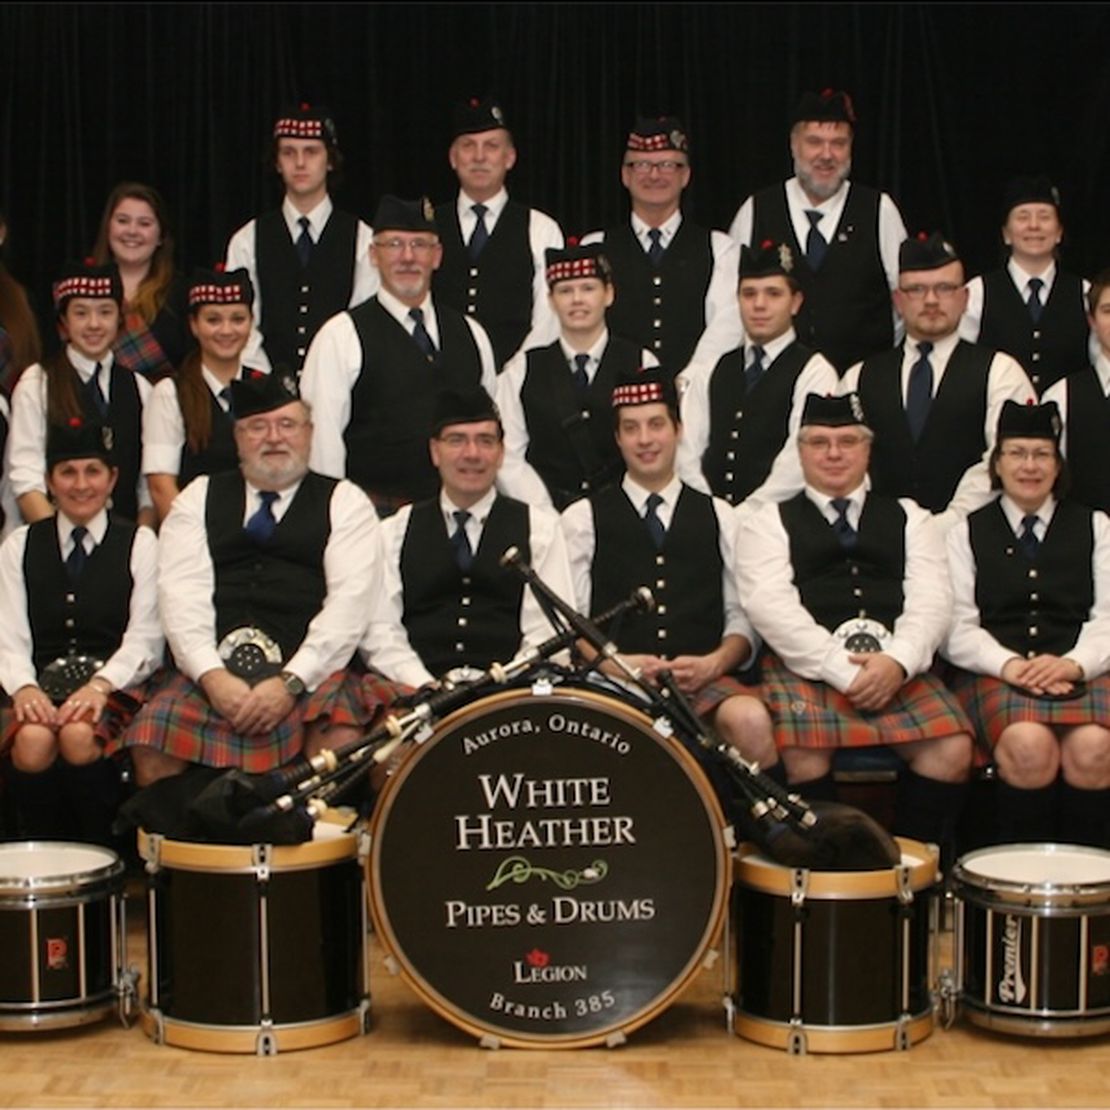 White Heather Pipes & Drums